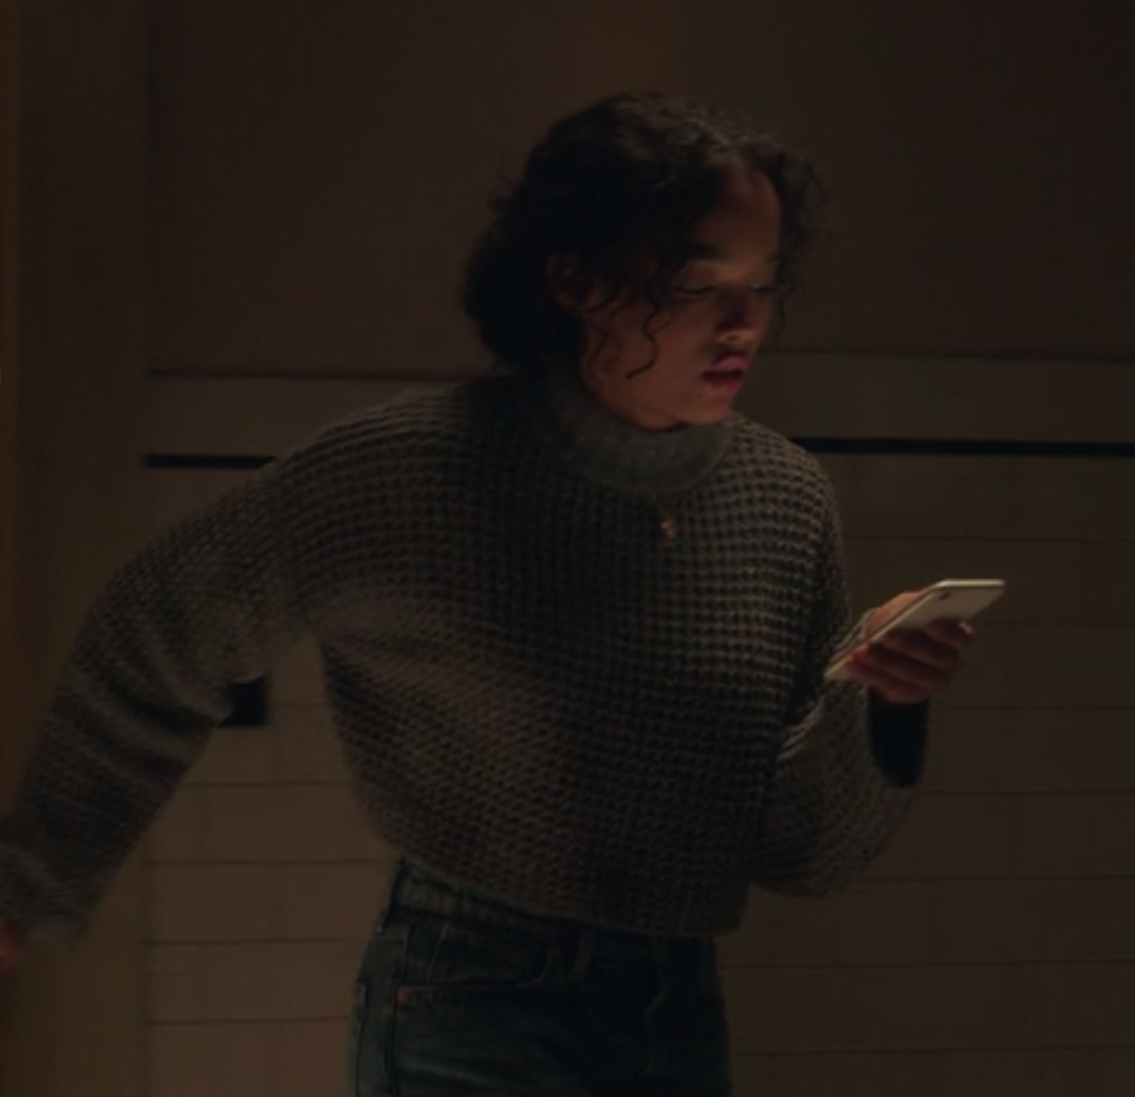 Zoya wears a dark cropped cowl-neck sweater and high-waisted jeans